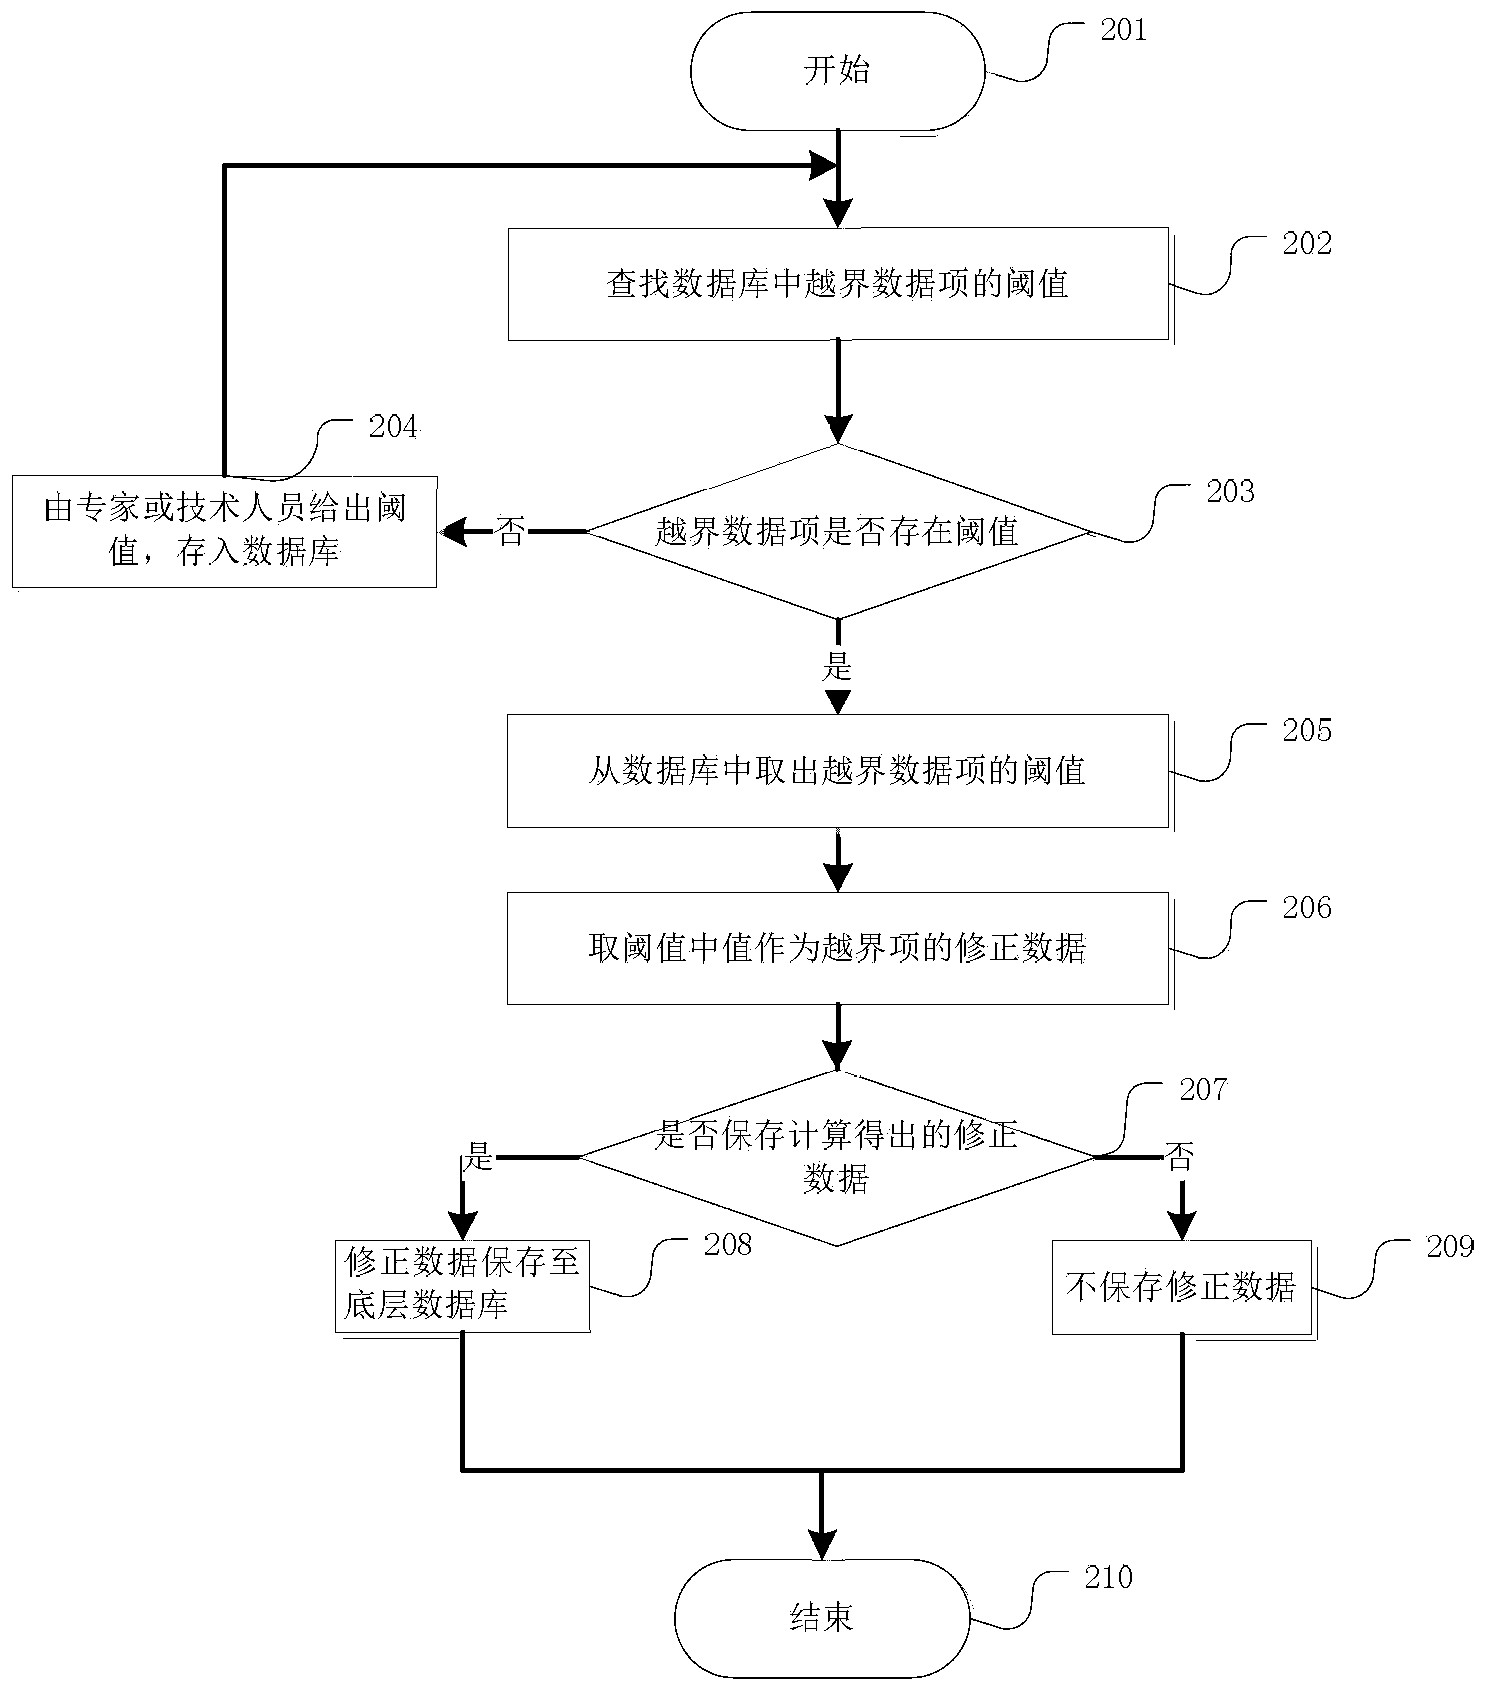 Abnormal data detection and modification method based on numerical value relevance model